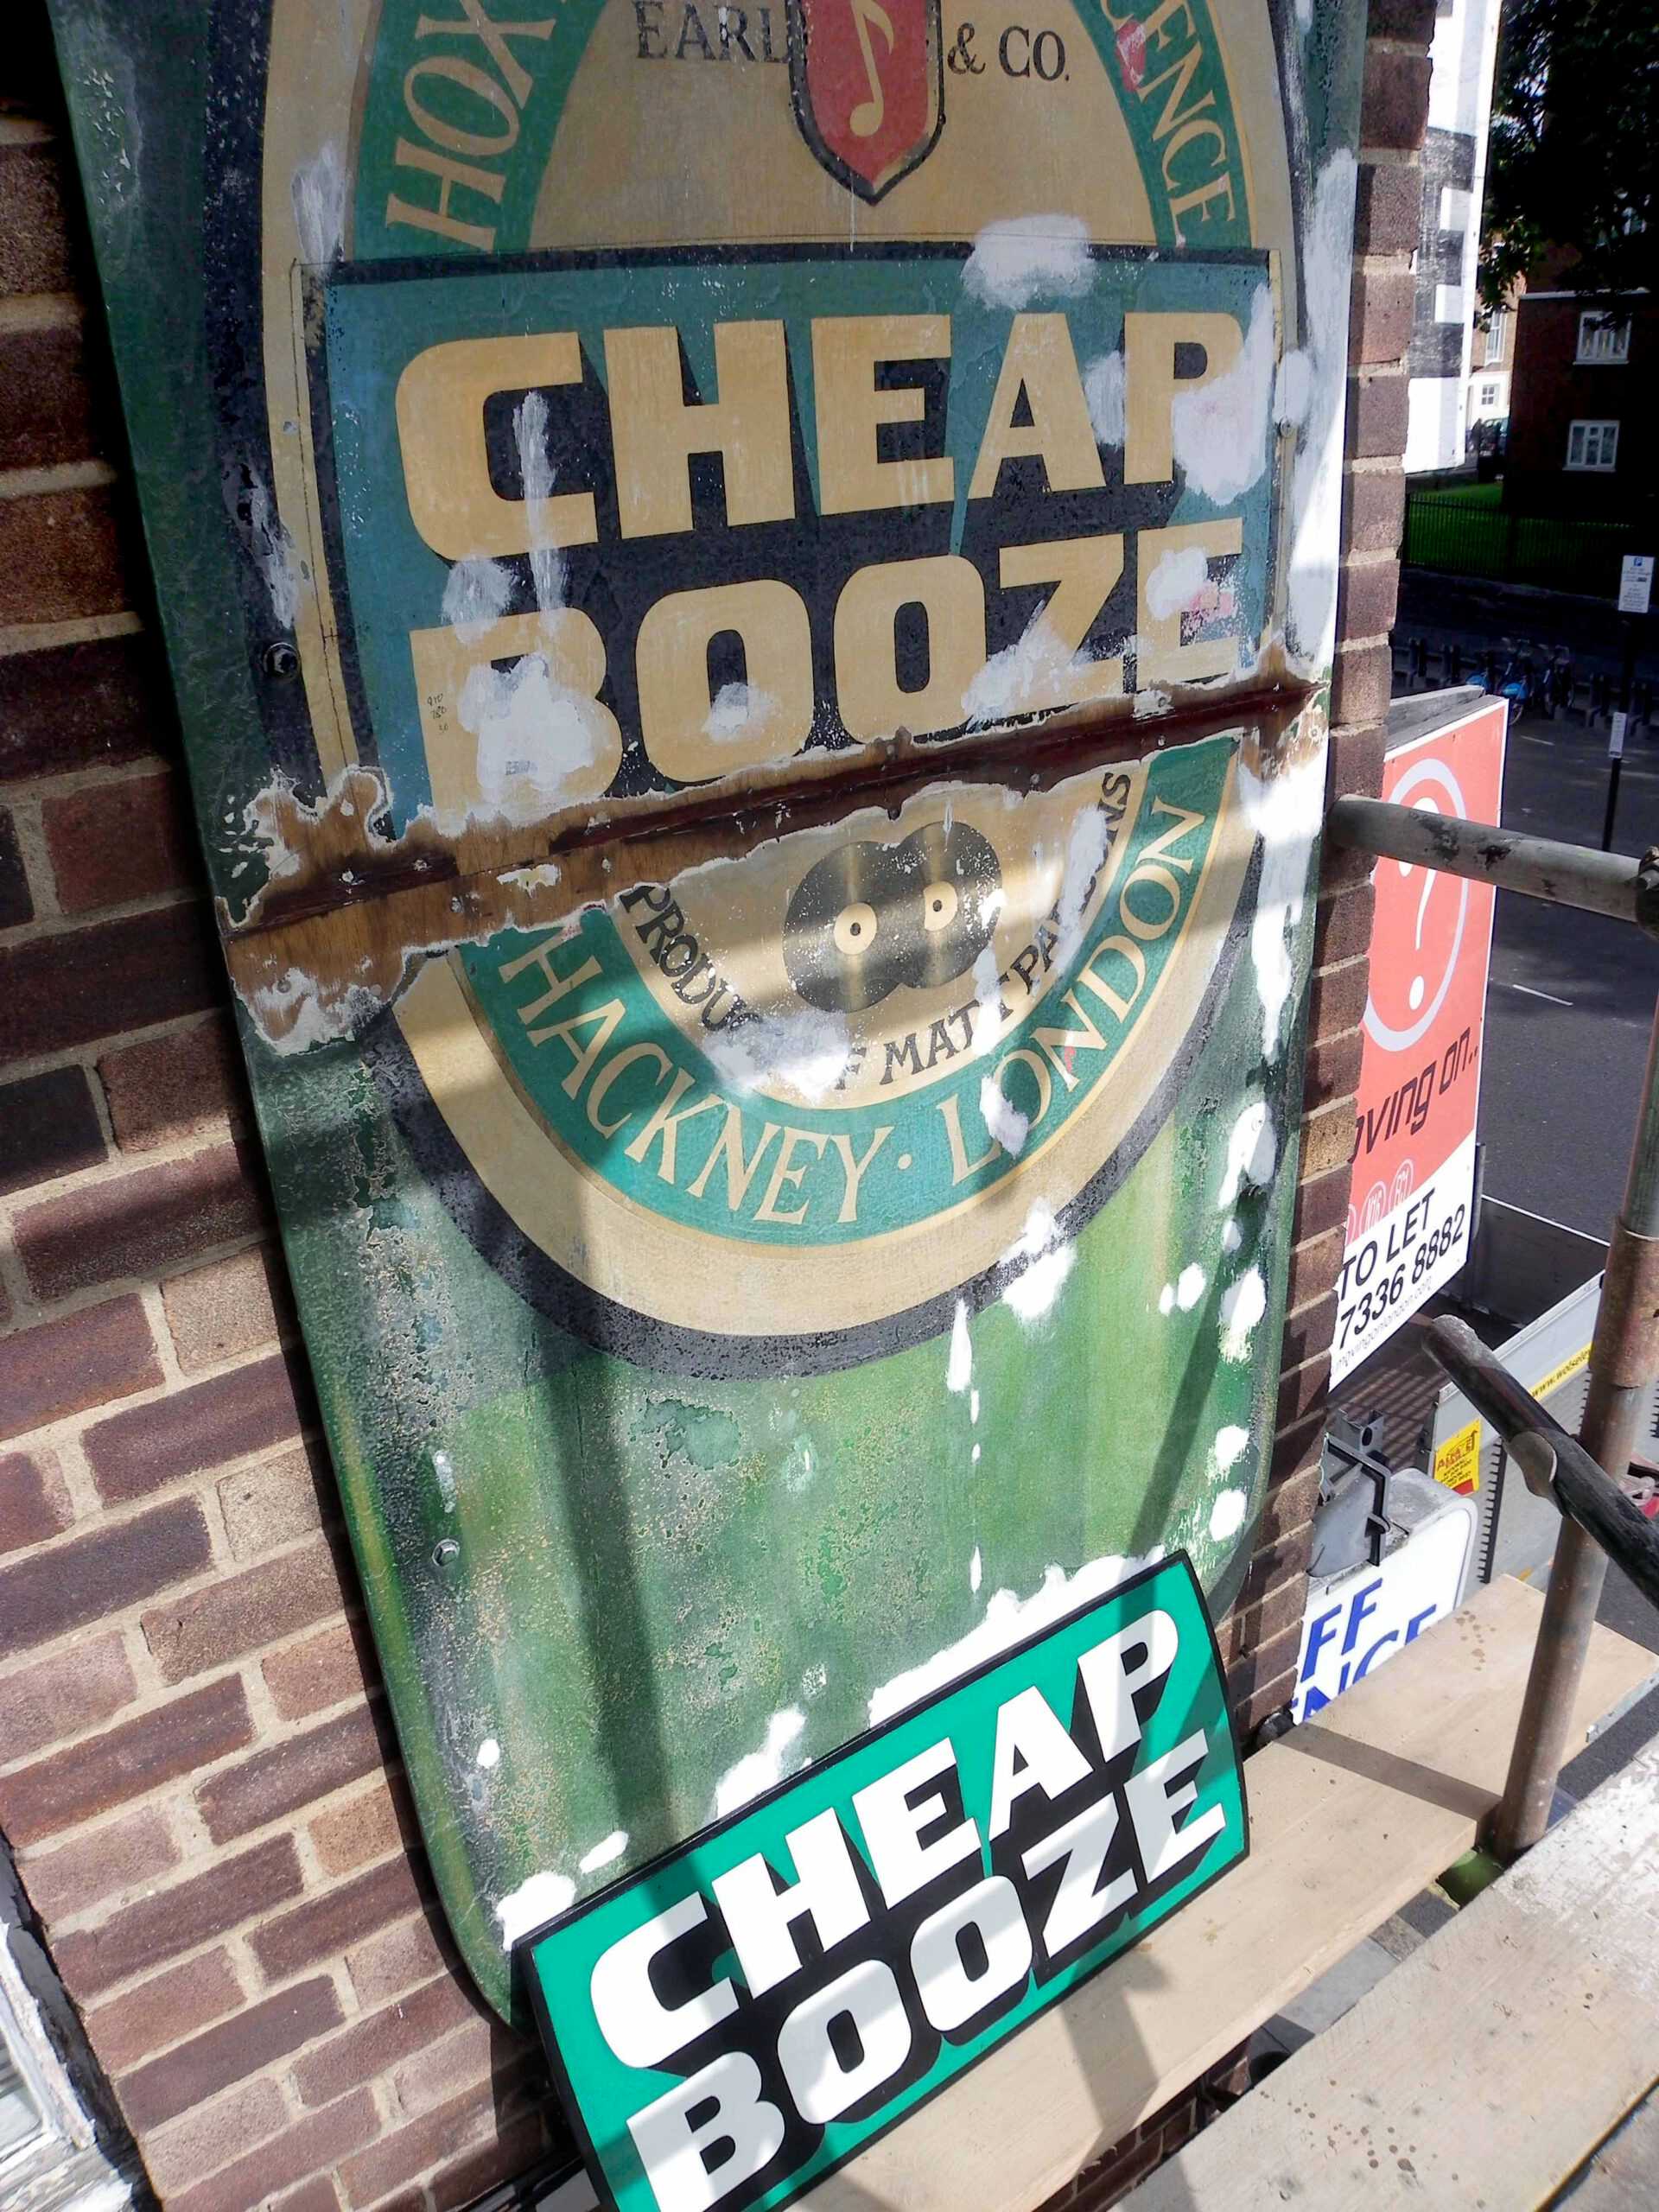 Repair work underway with replacement Cheap Booze sign to protect join in
panels.